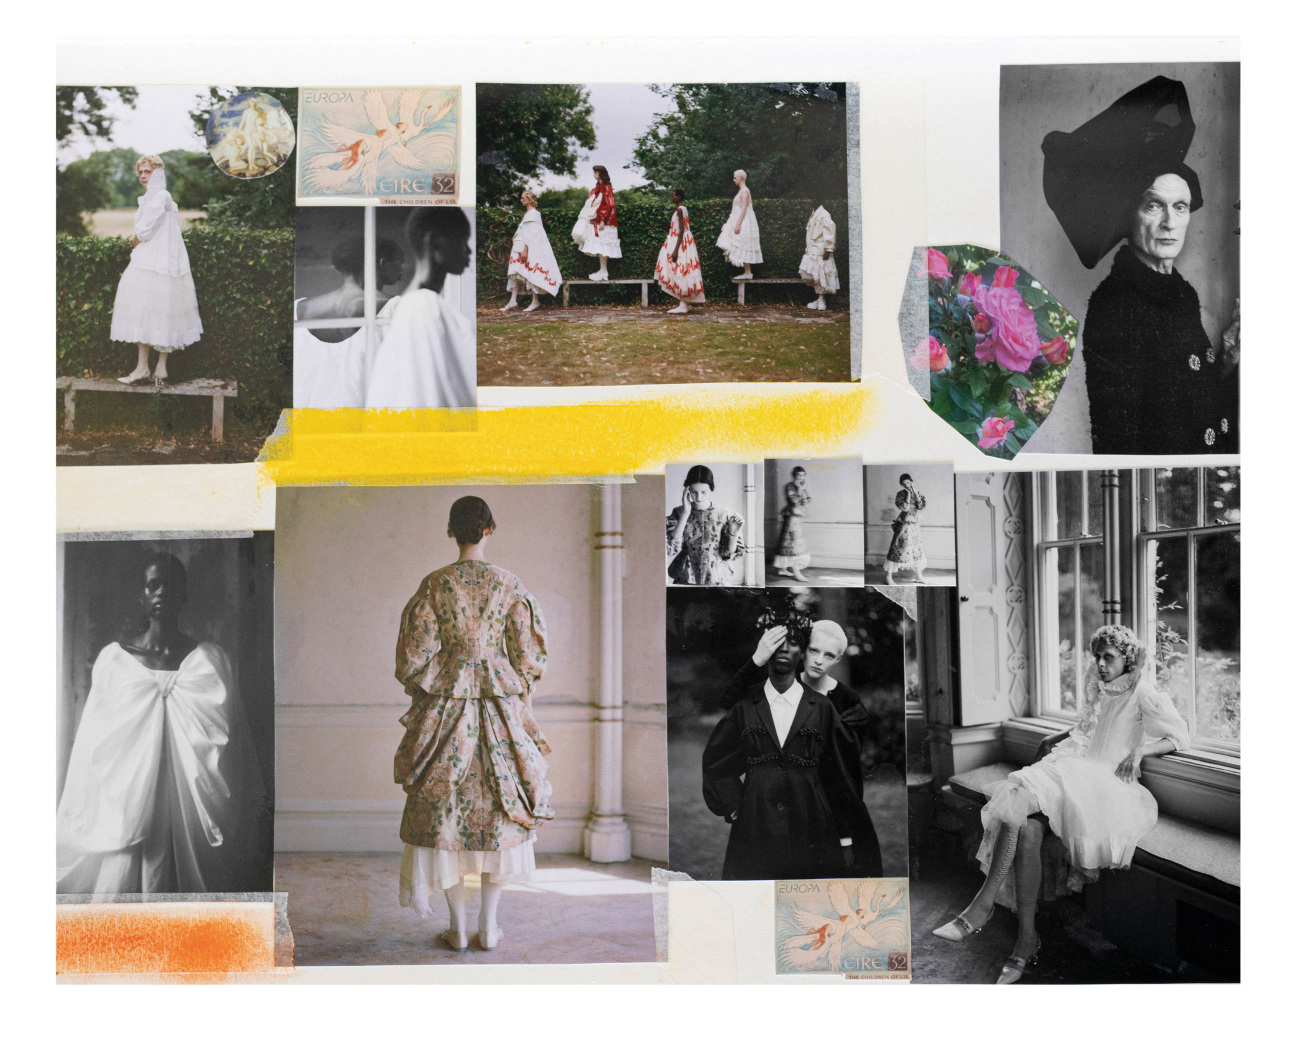 A collage of images from a collection by fashion designer Simone Rocha.